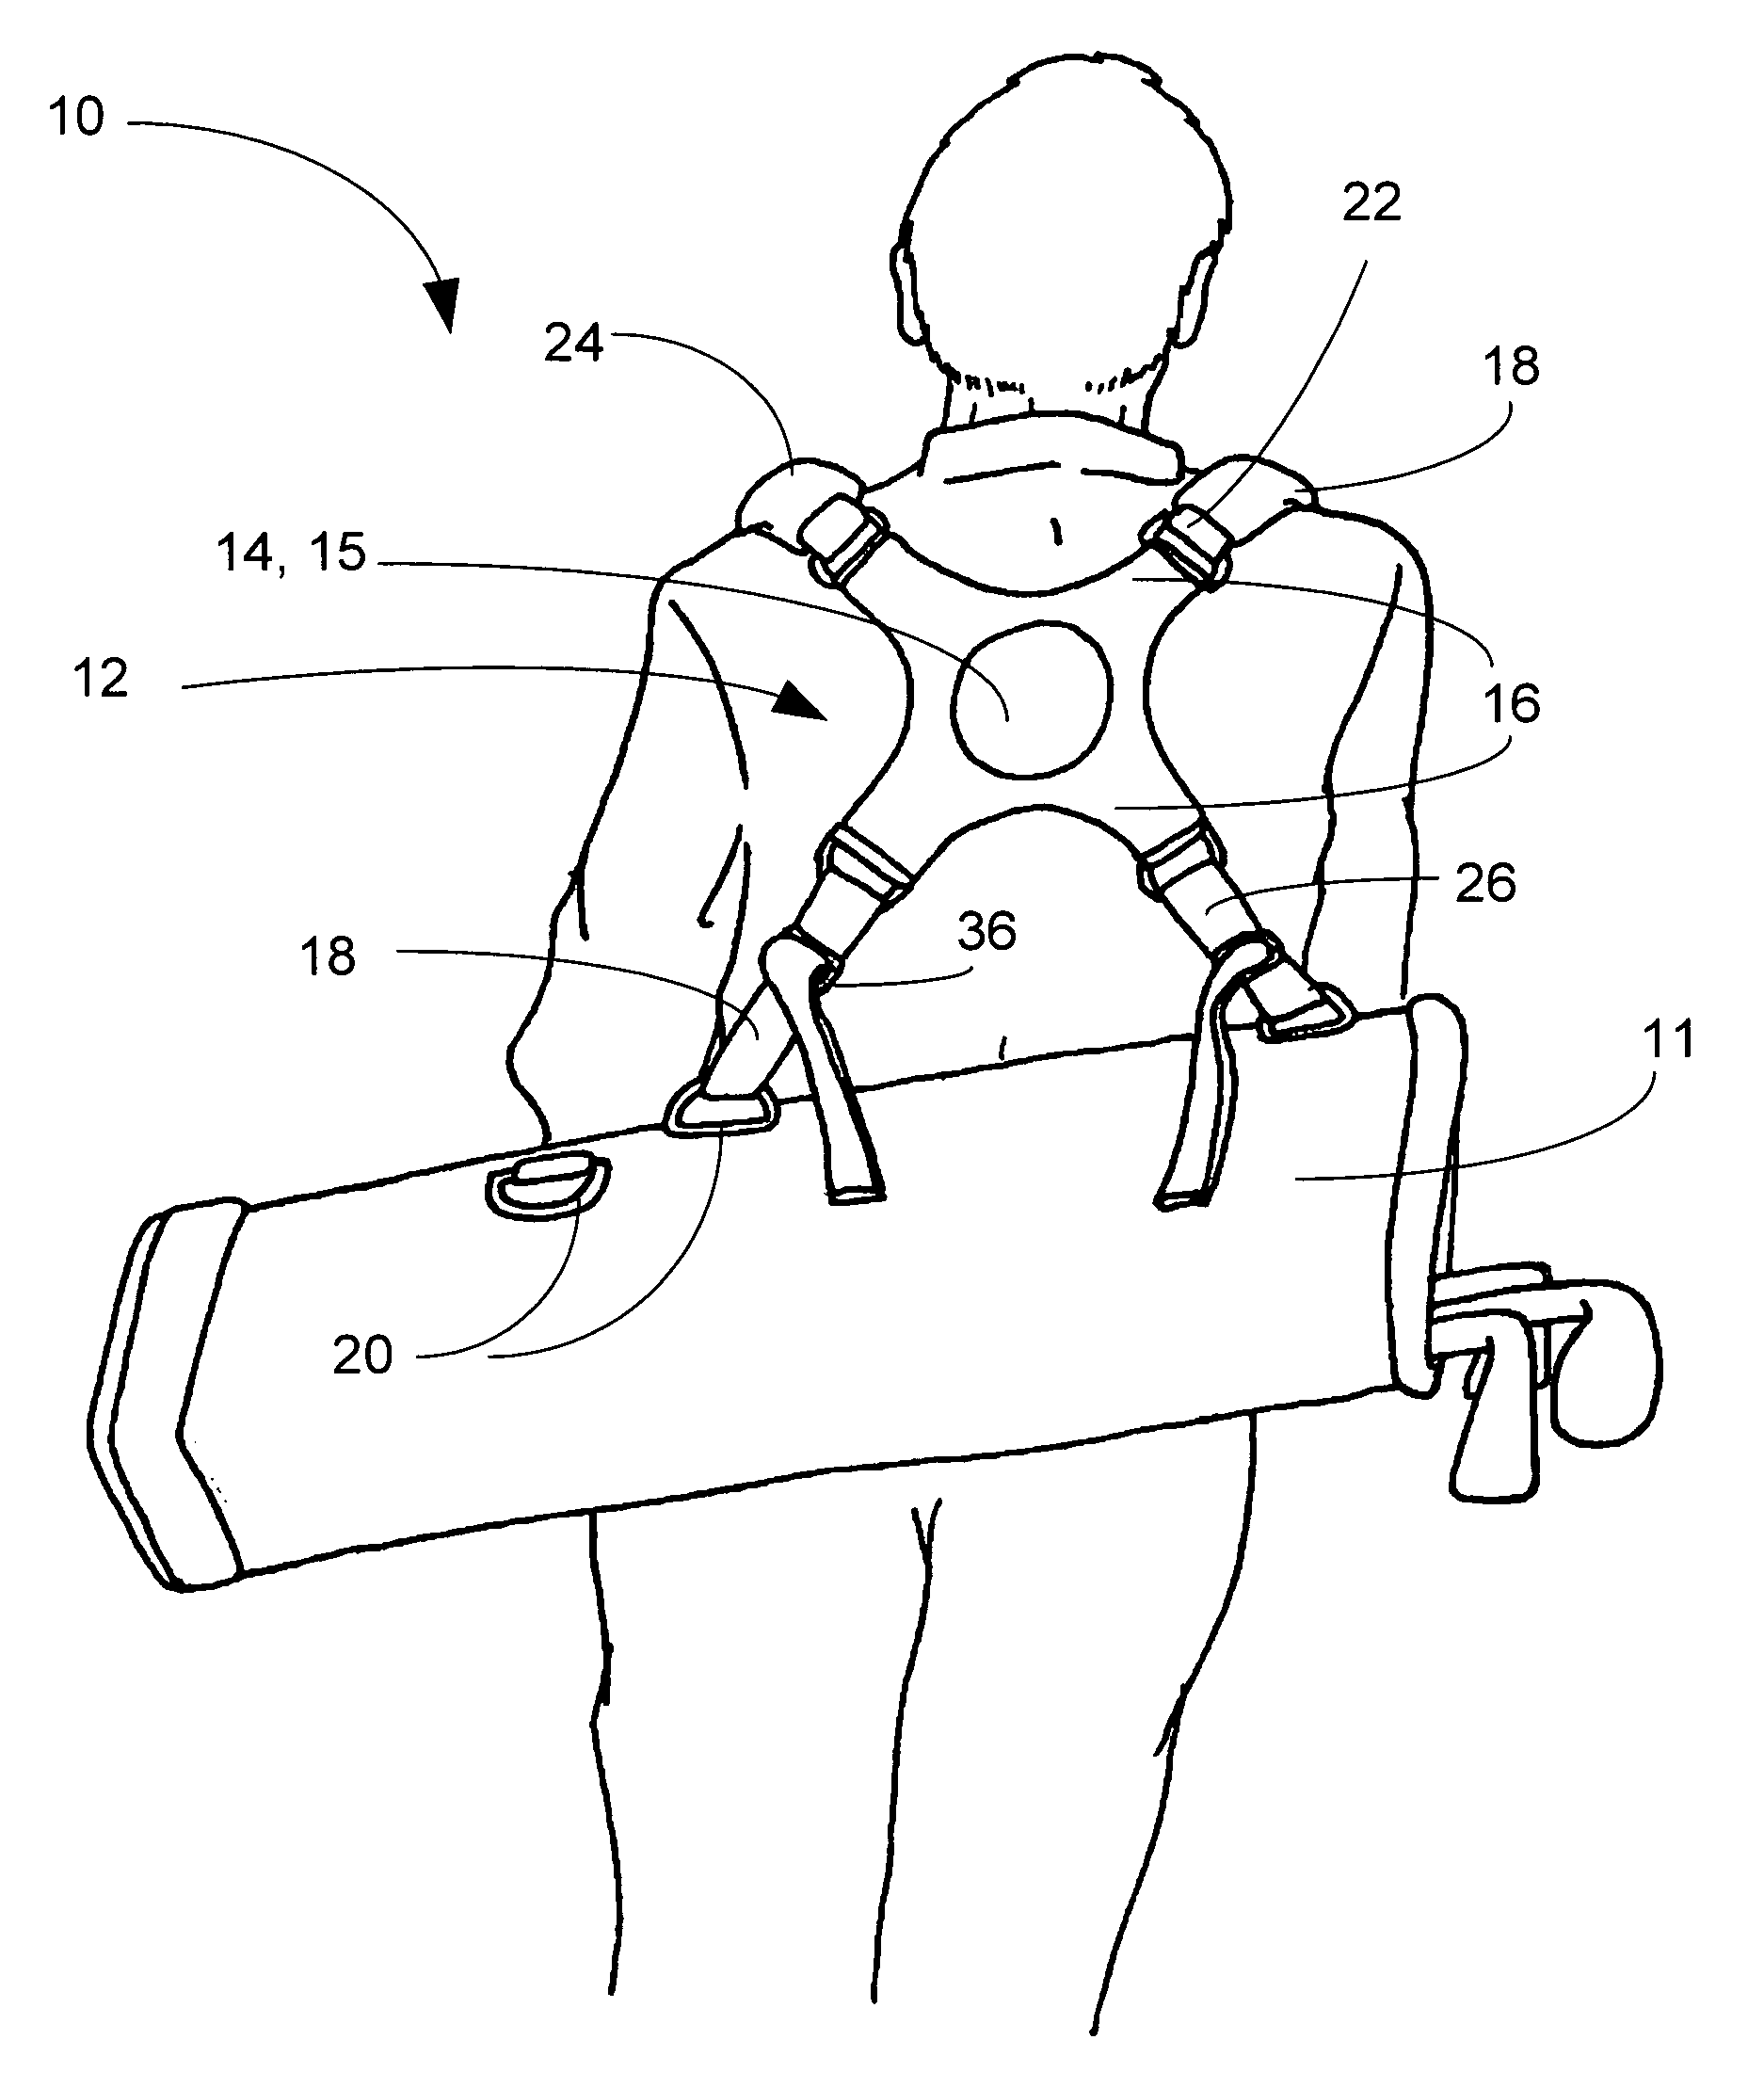 Golf bag and strap system